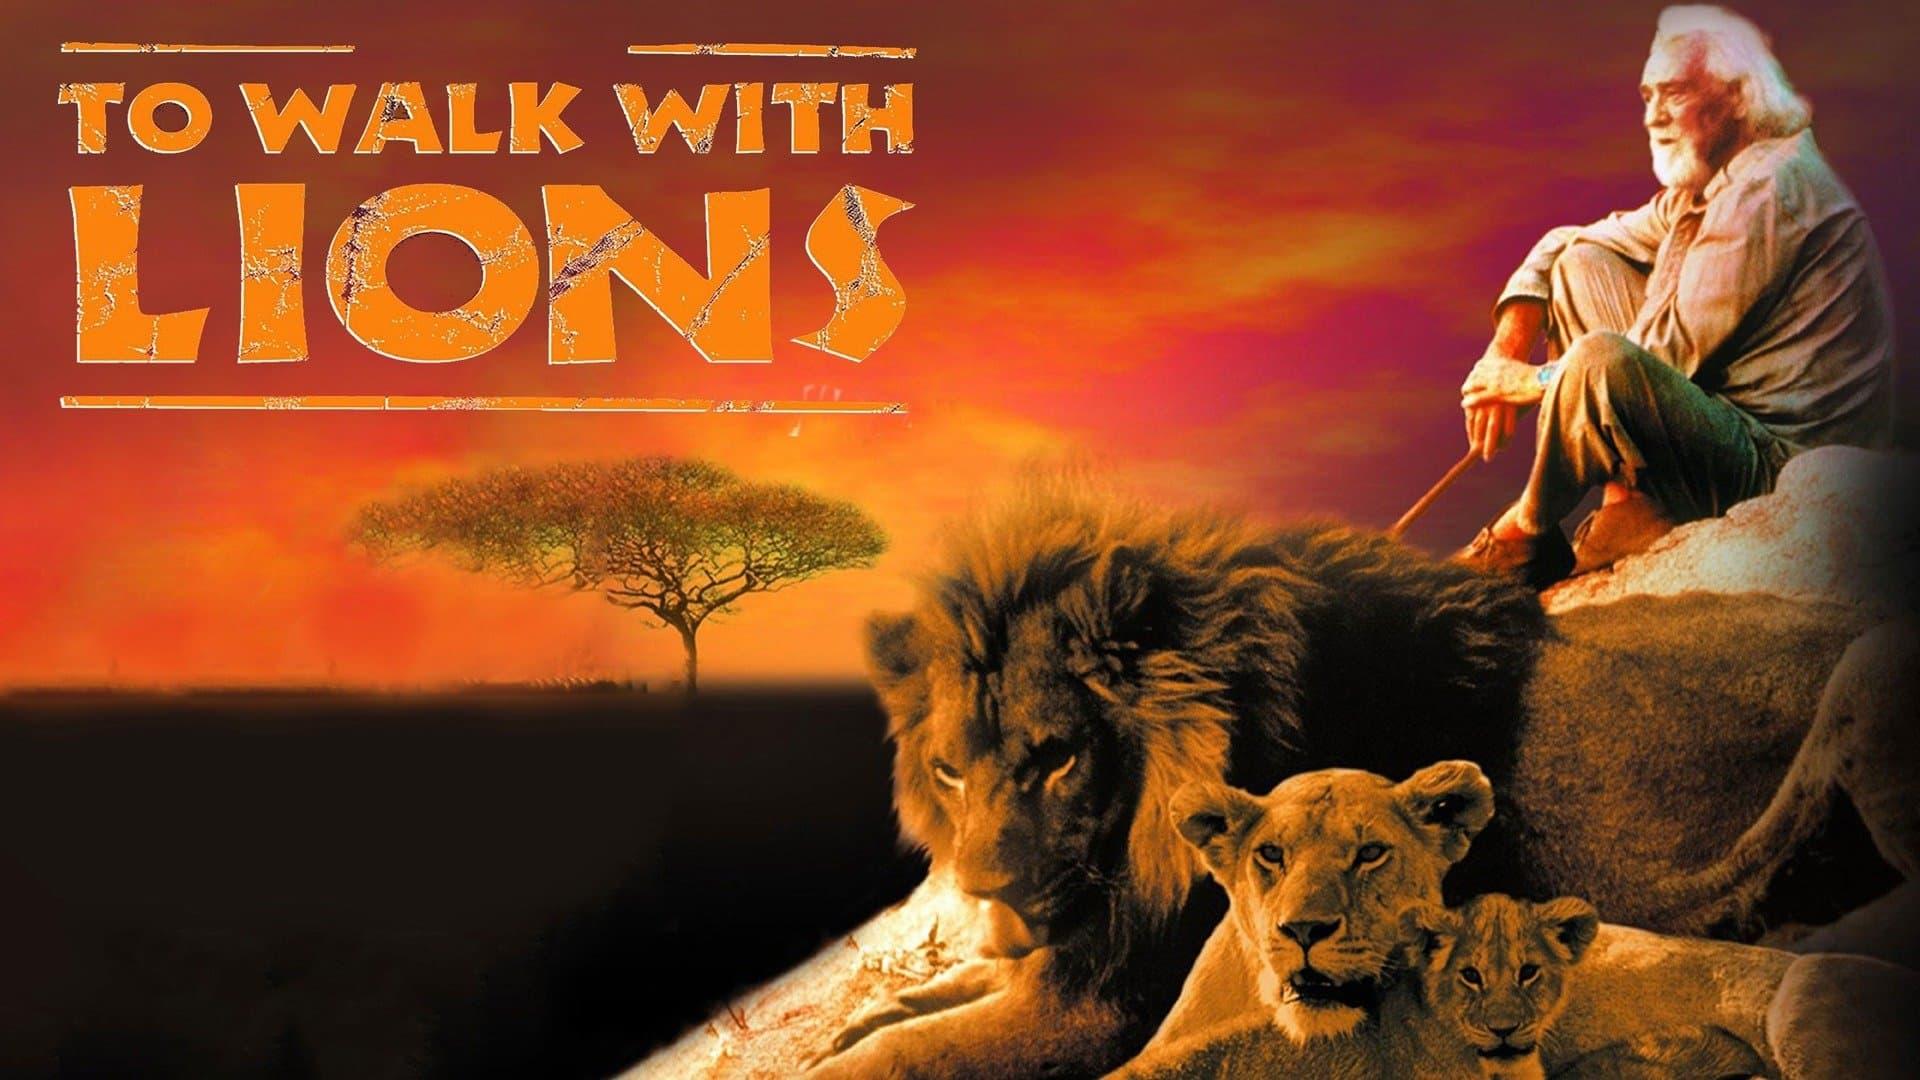 To Walk with Lions backdrop